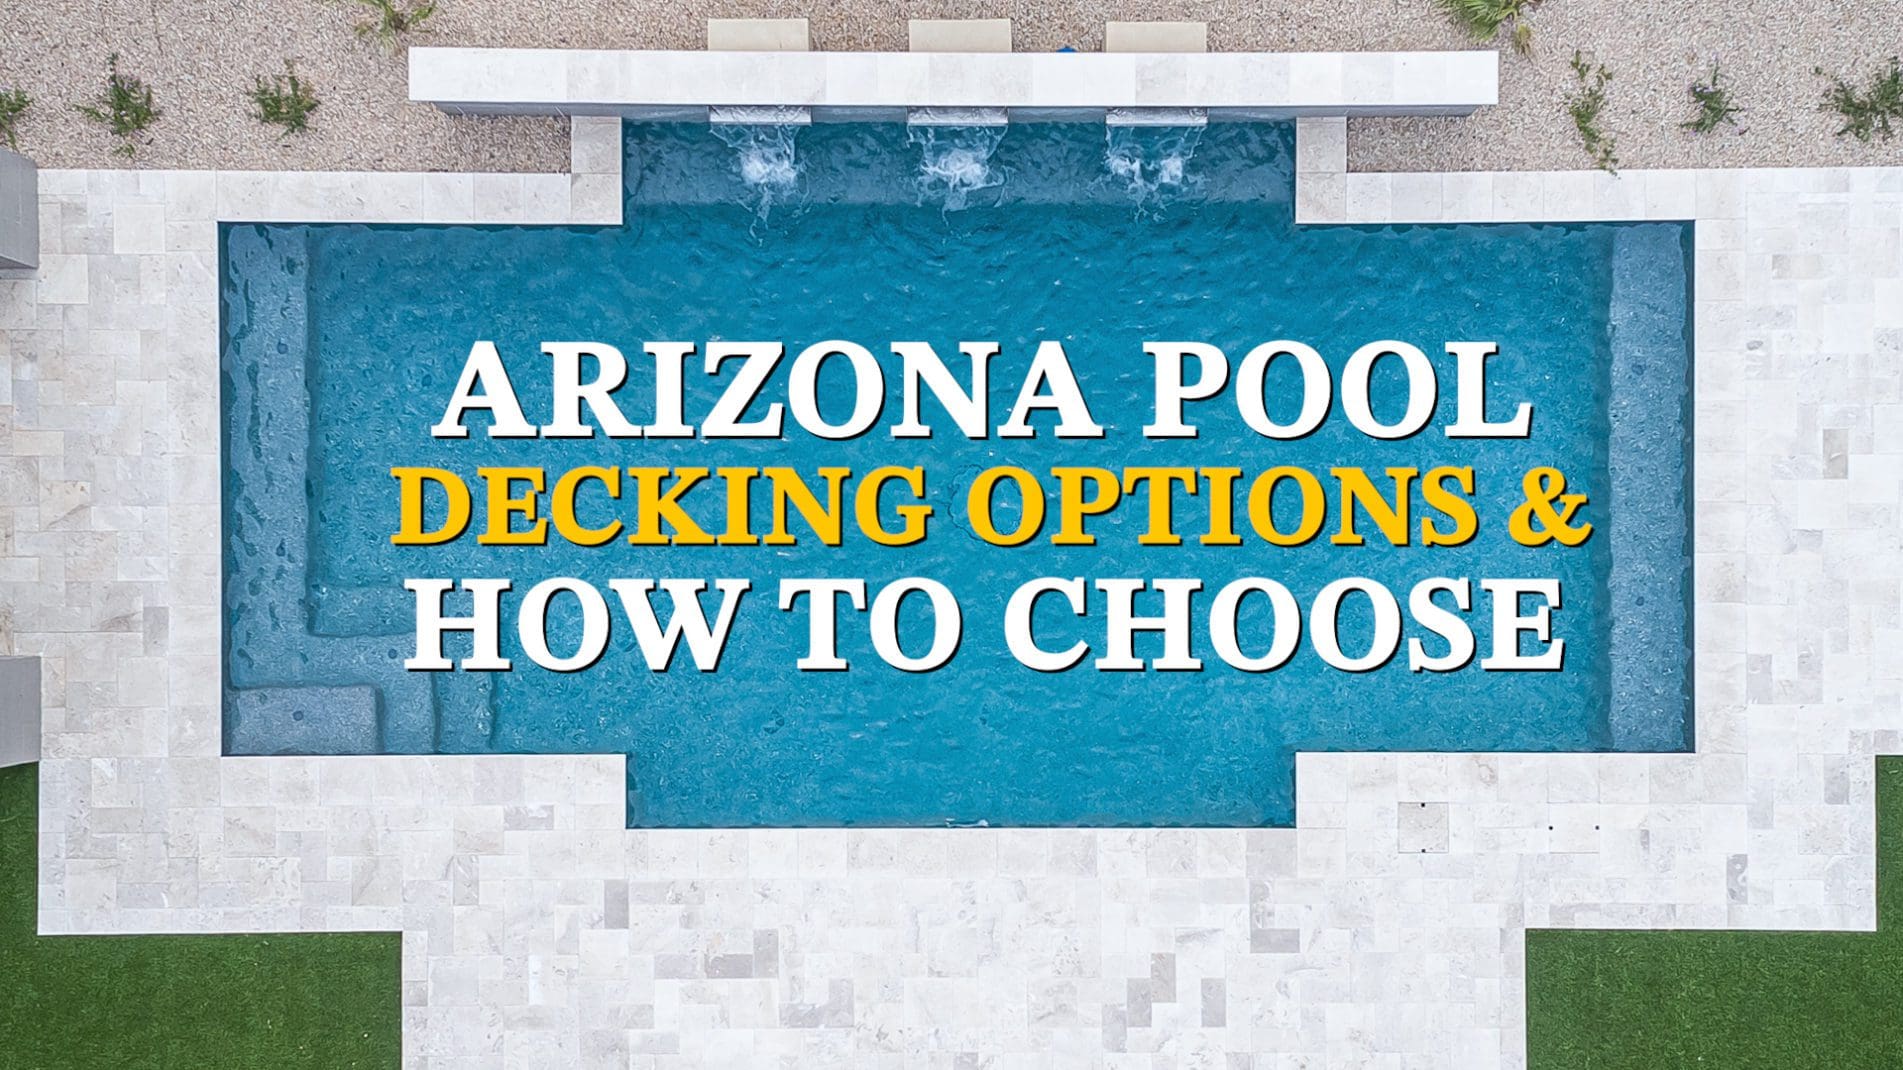 Arizona Pool Decking Options And How To Choose